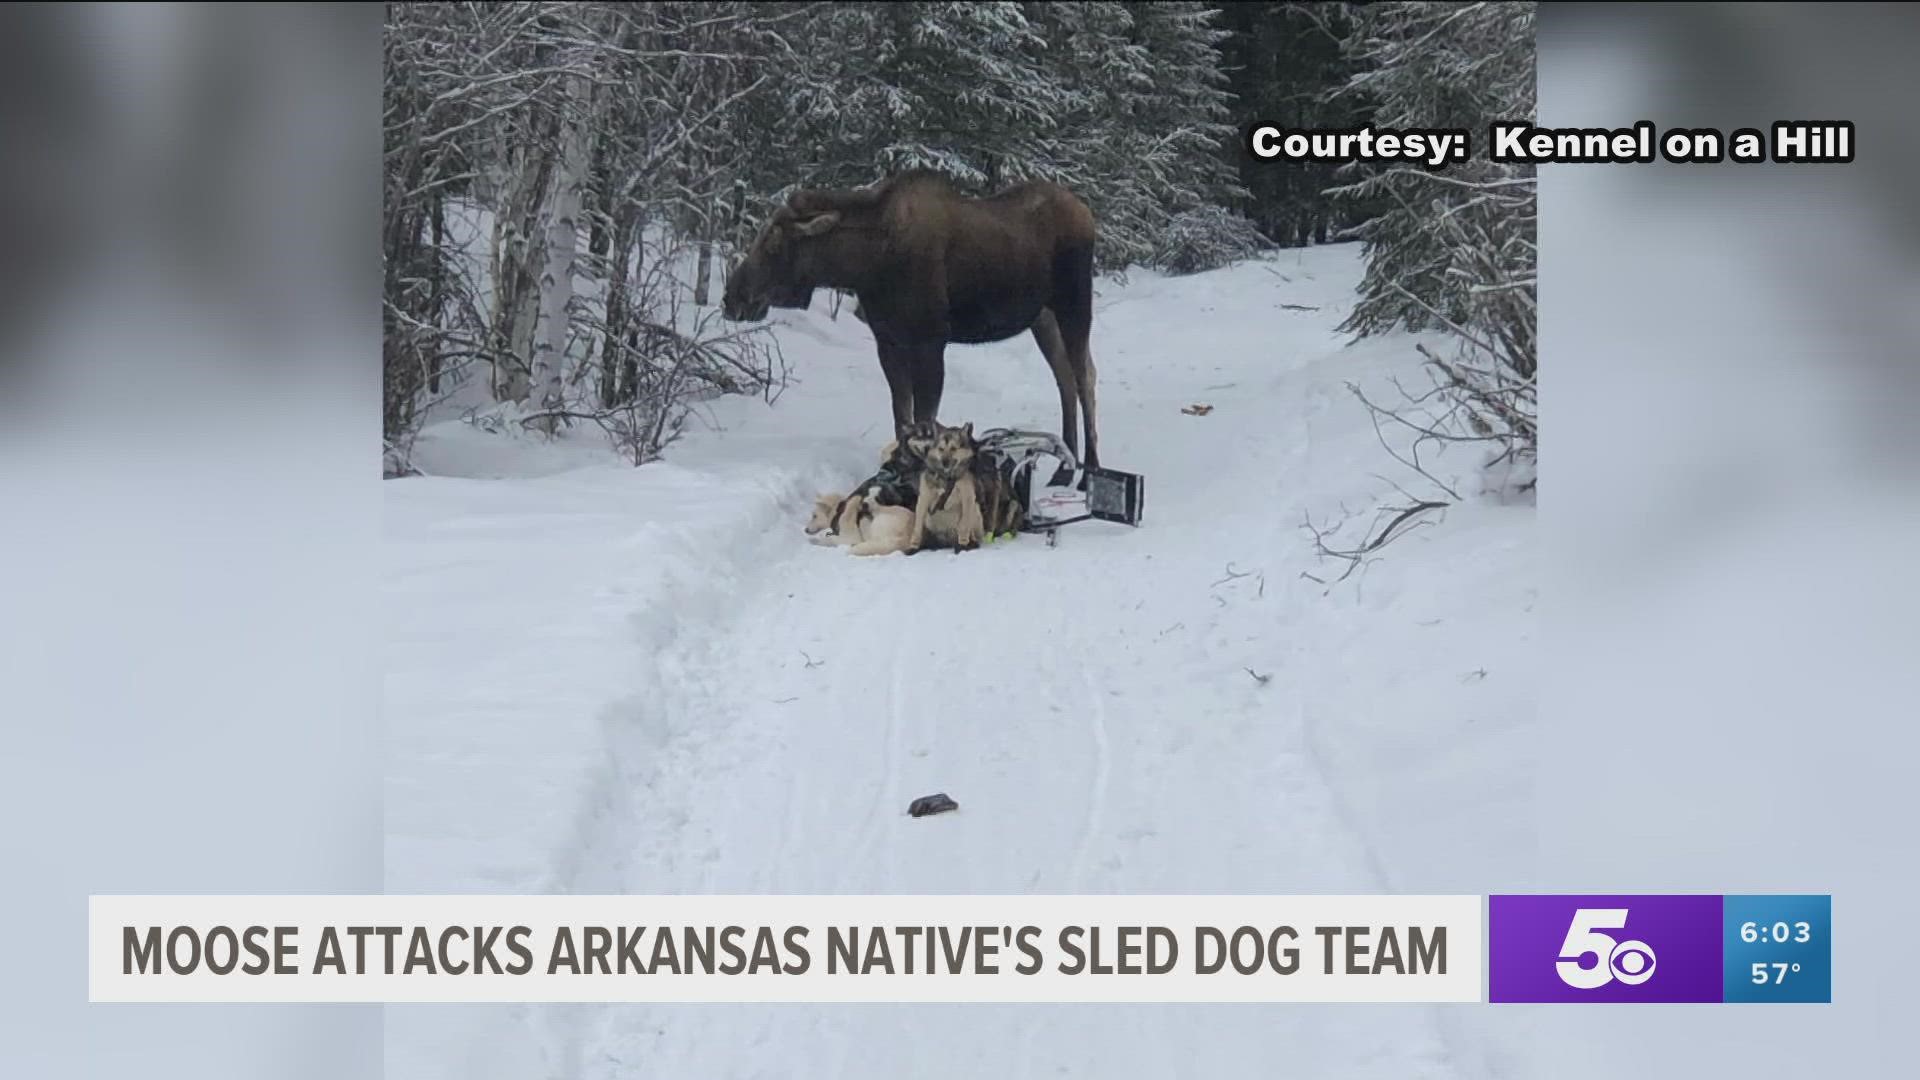 Arkansas native Bridgett Watkins and her sled dog team were attacked by a bull moose for over an hour while training in Alaska leaving four of her dogs injured.